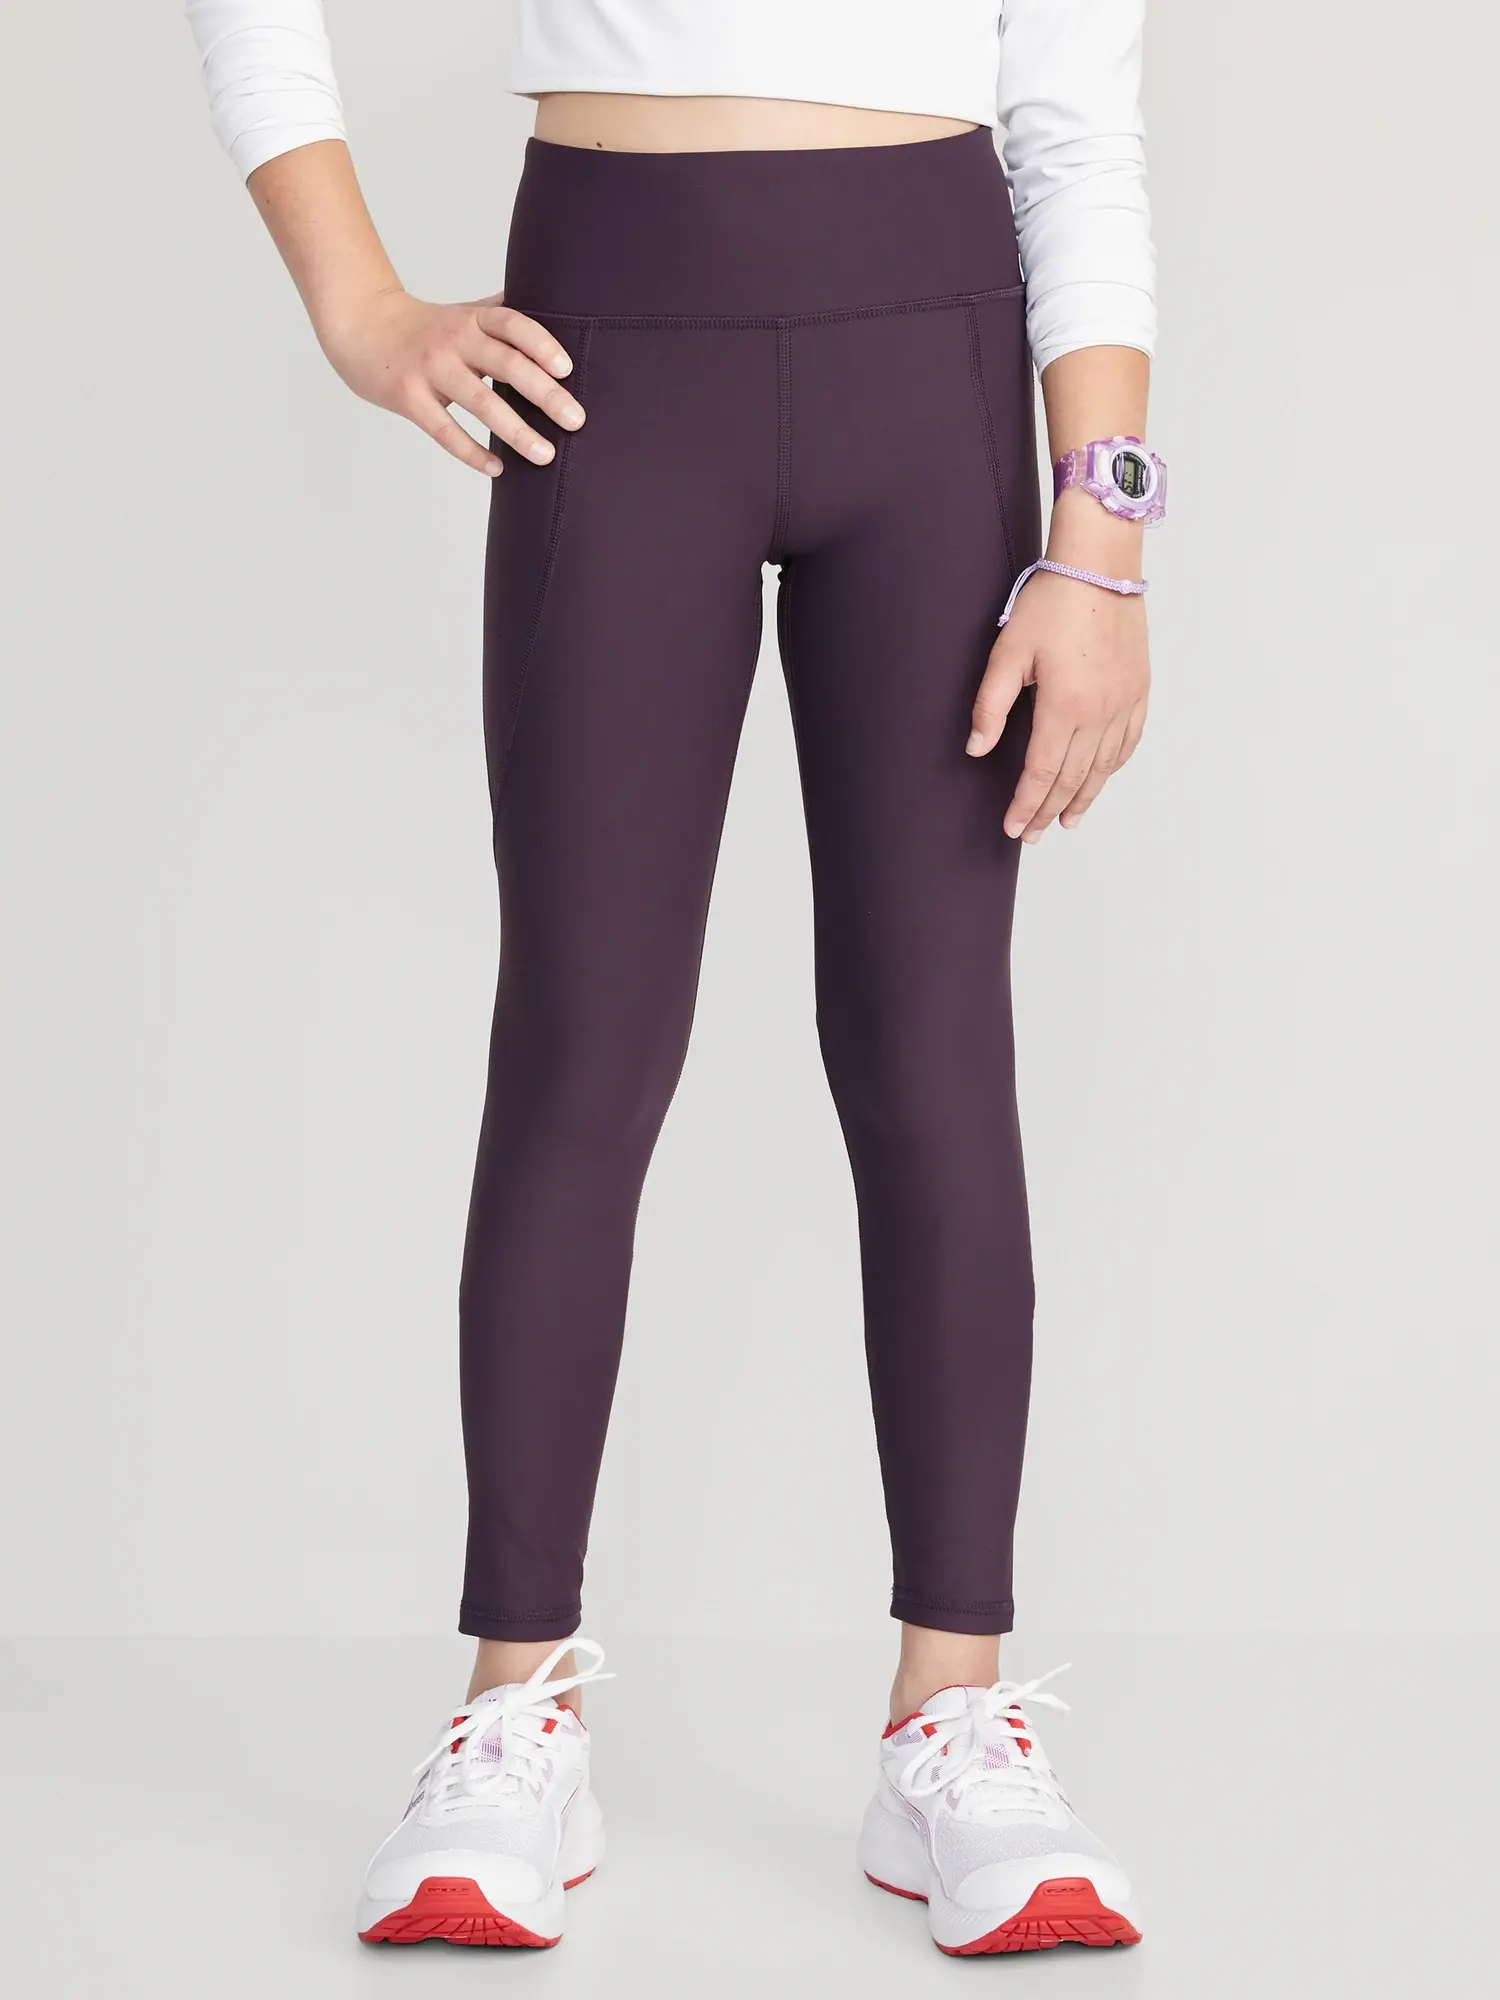 Old Navy High-Waisted PowerSoft 7/8 Leggings for Girls purple. 1